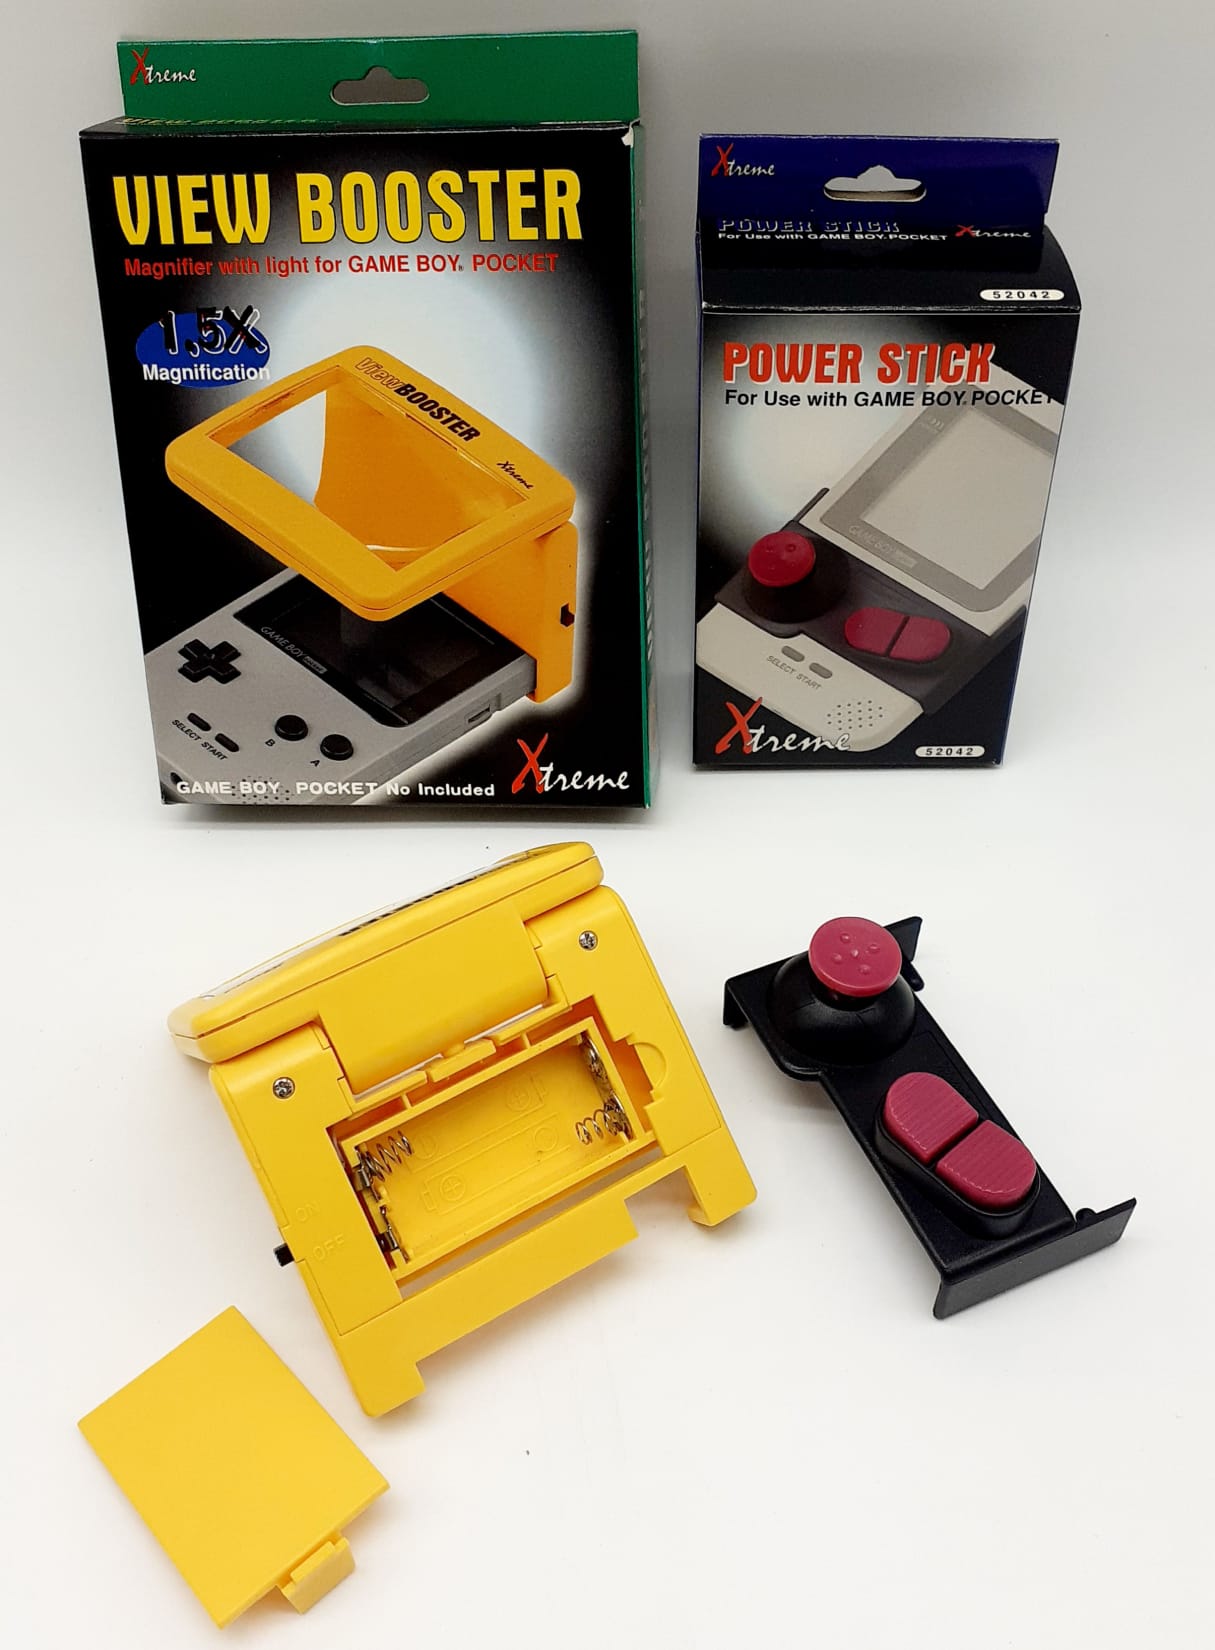 Gameboy View booster + Power stick